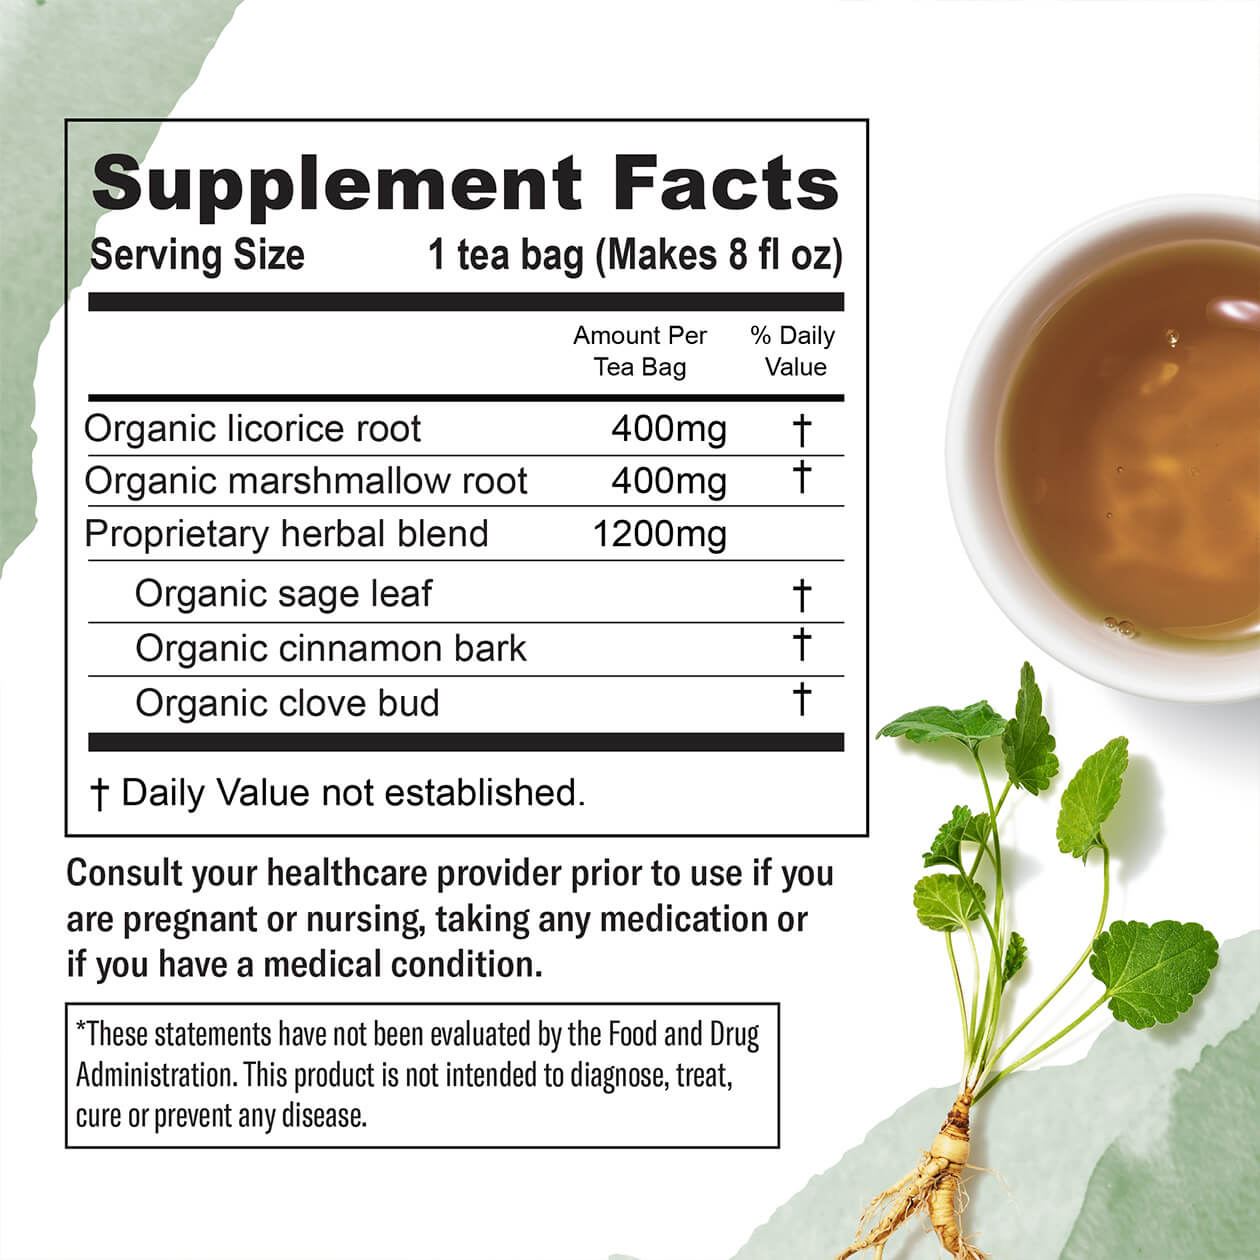 The supplement facts for Numi's Throat Soother dietary supplement tea